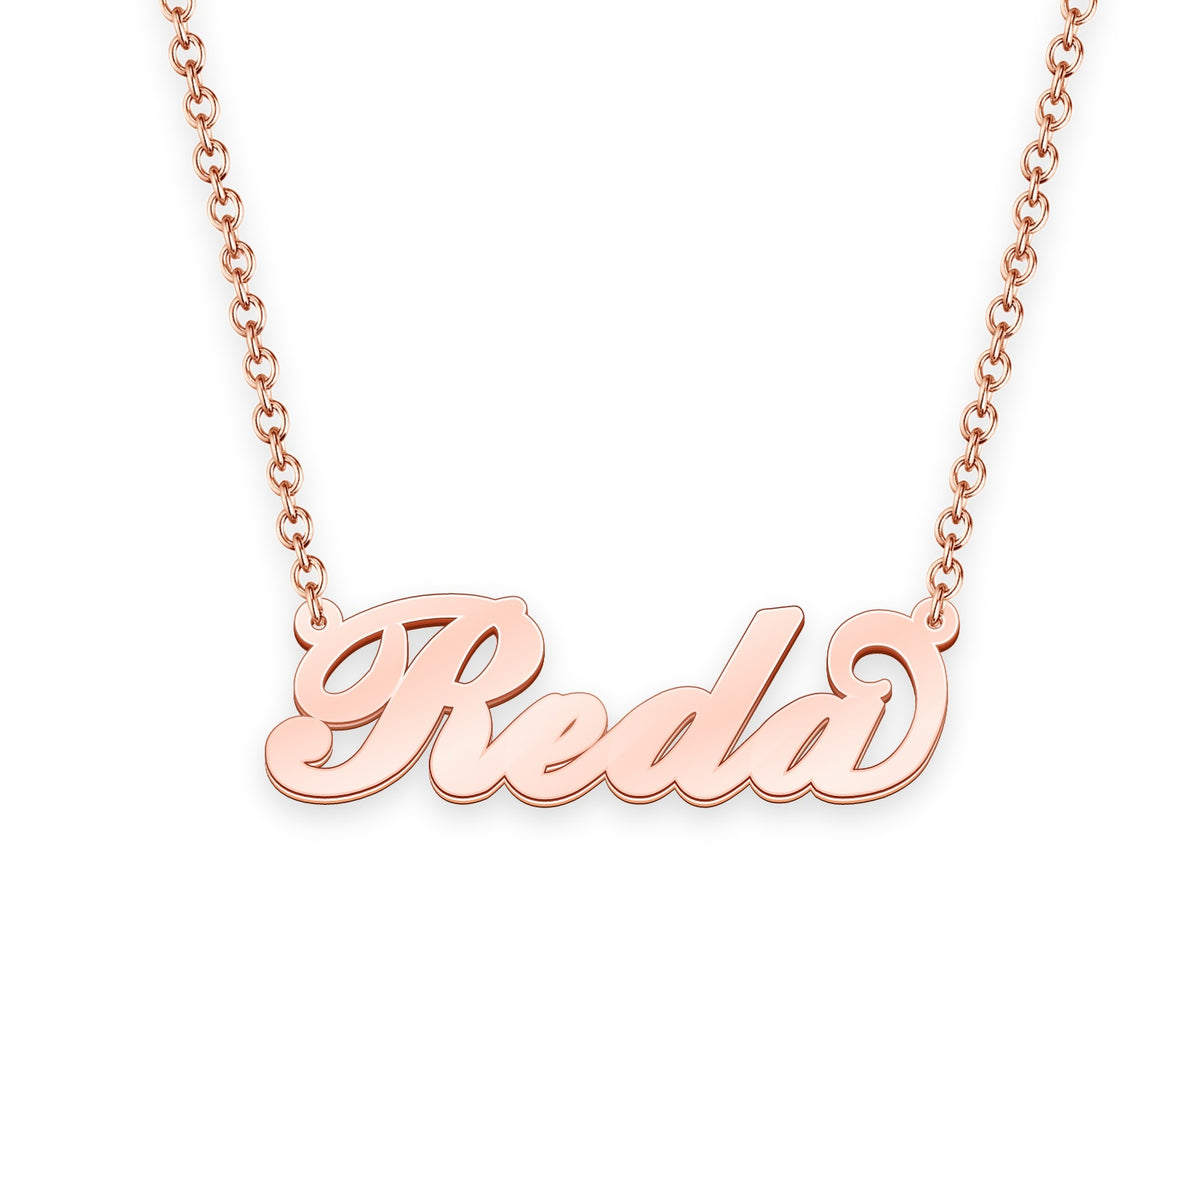 The Engraved Block Reda Link Necklace